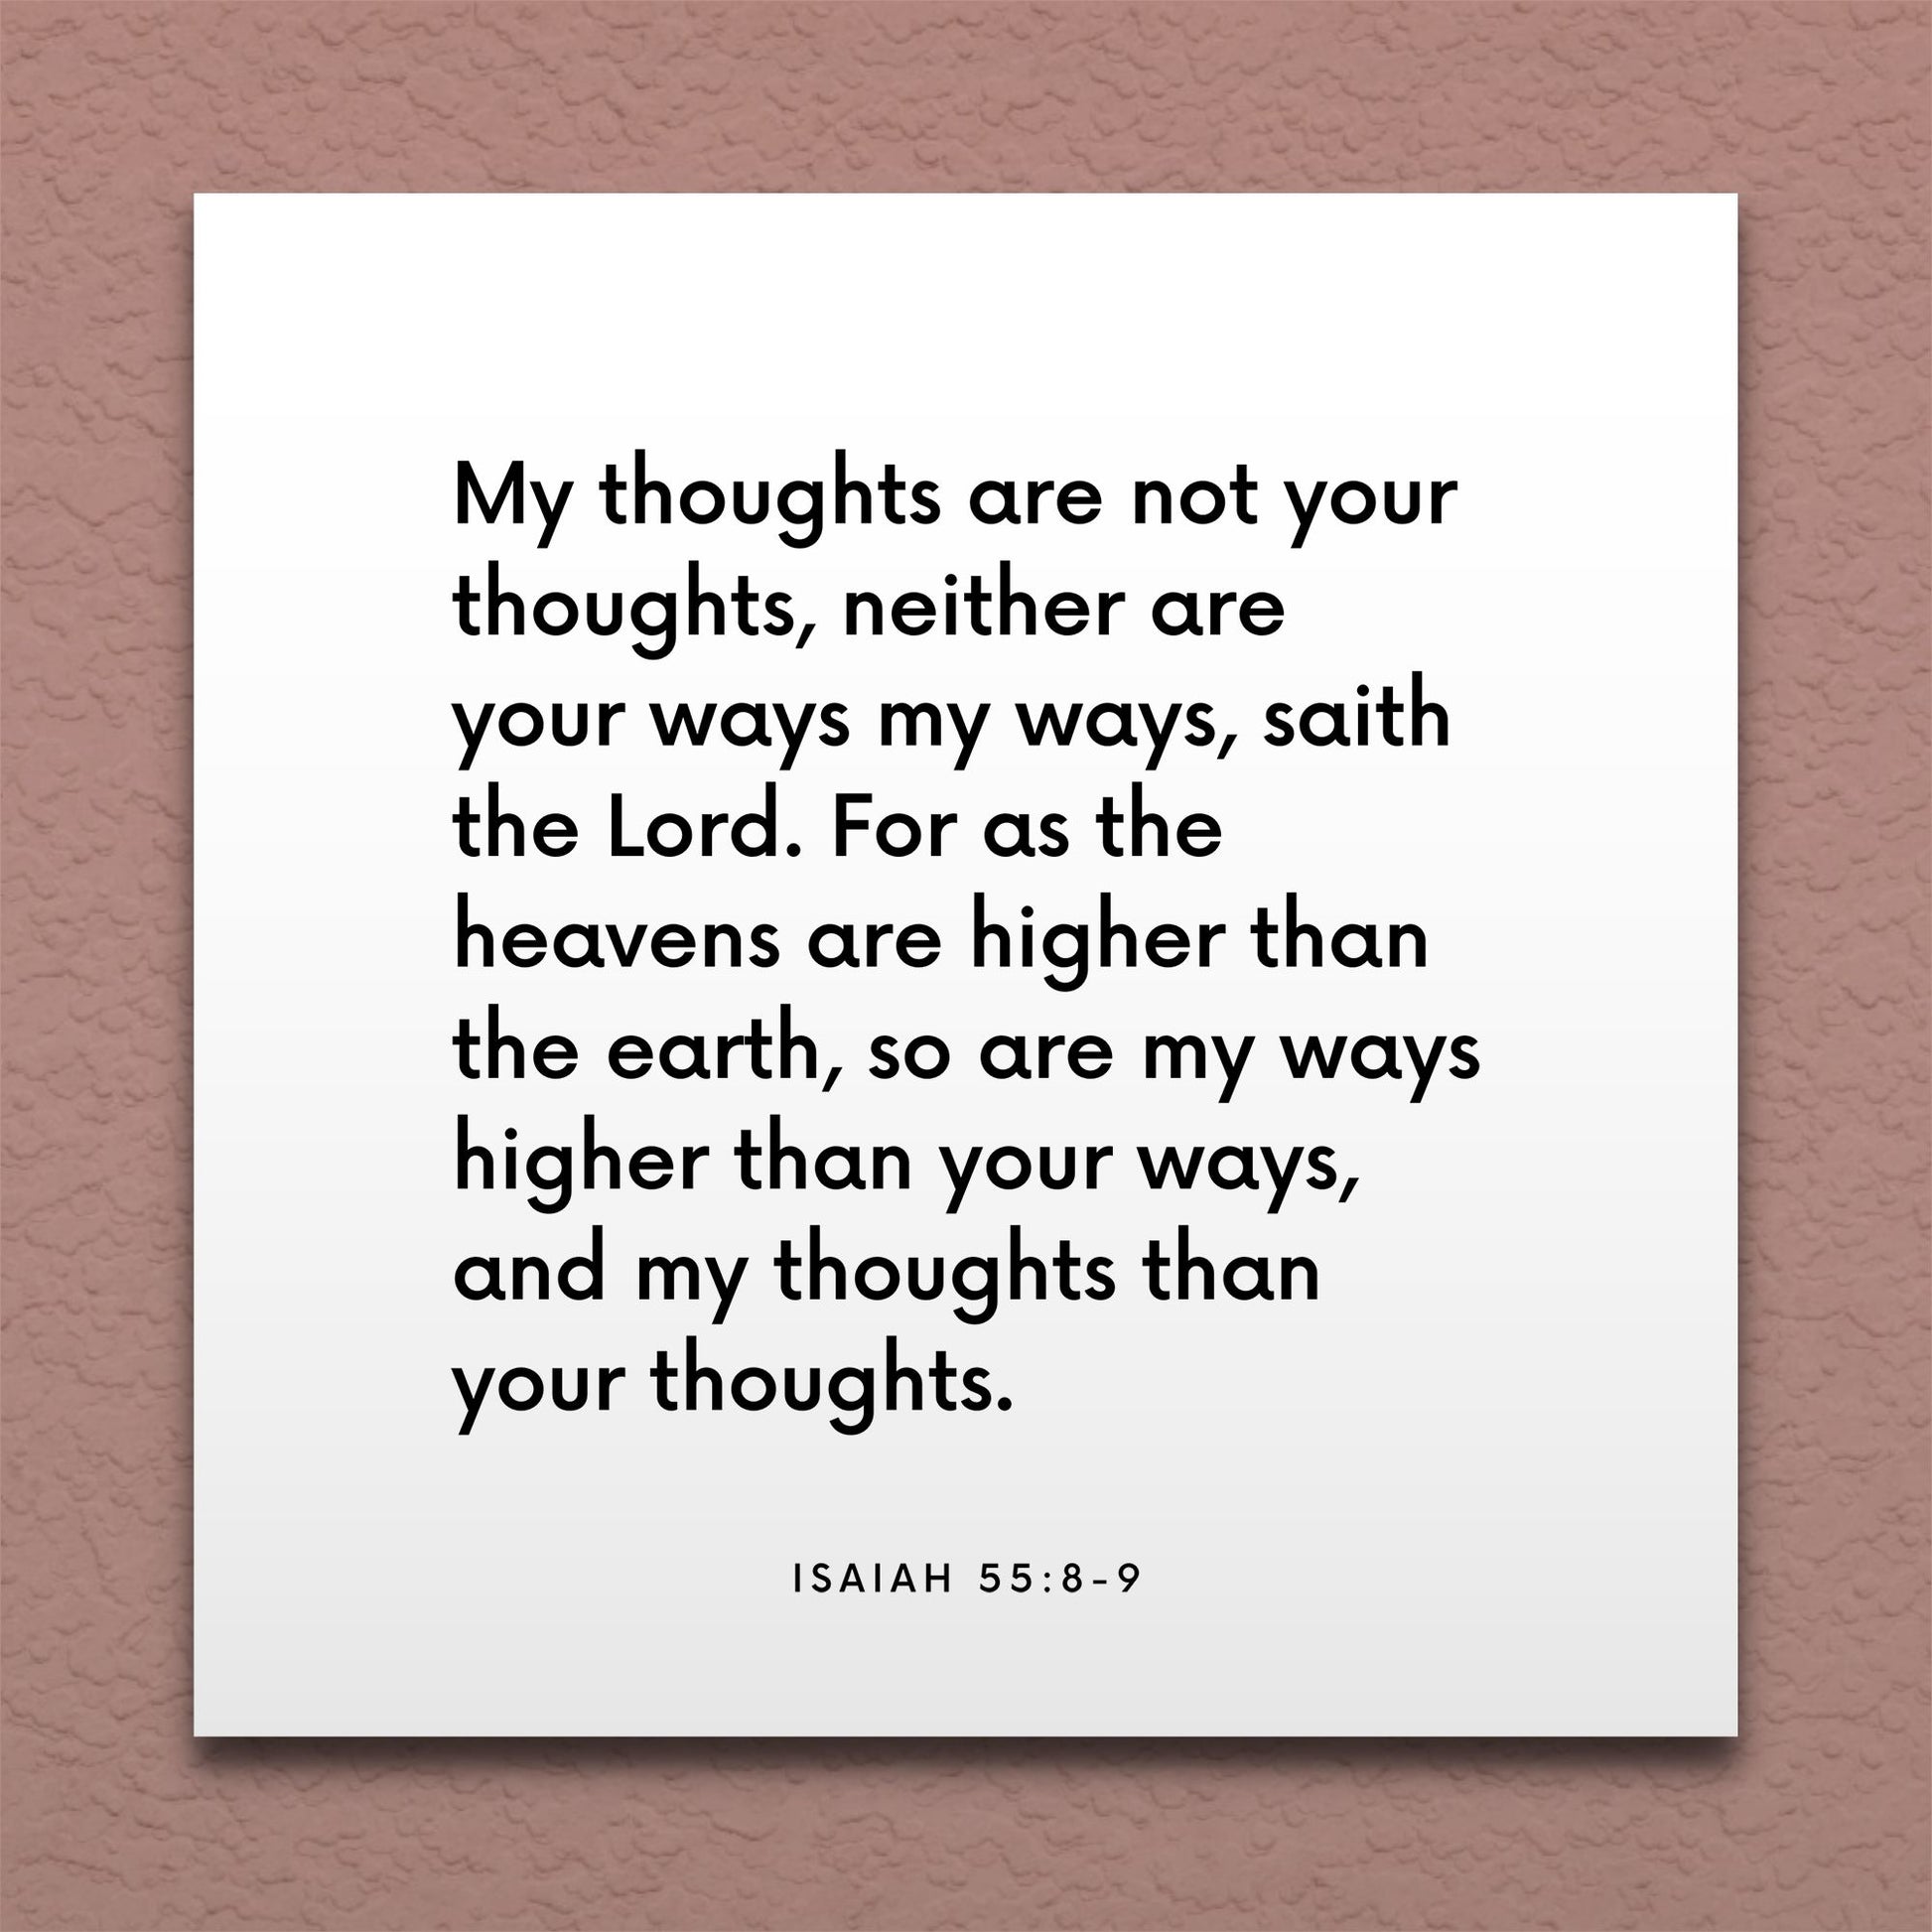 Wall-mounted scripture tile for Isaiah 55:8-9 - "My thoughts are not your thoughts, neither your ways my ways"